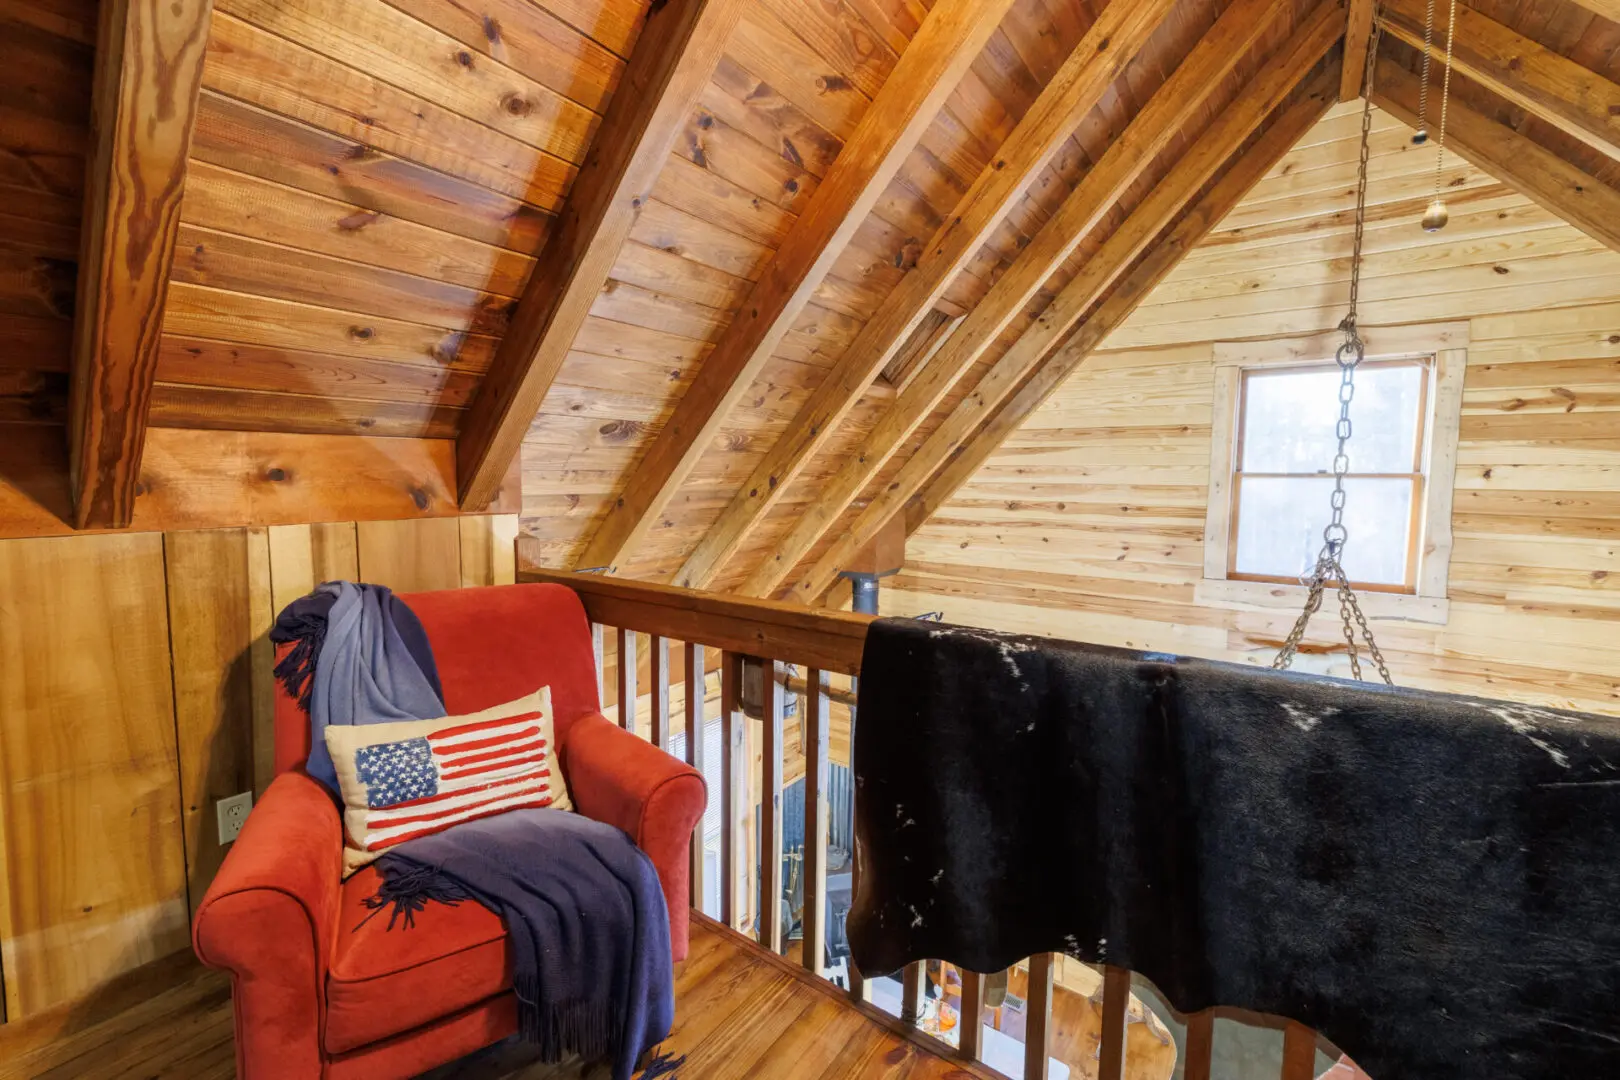 A chair with an american flag on it in a log cabin, perfect for a vacation getaway.